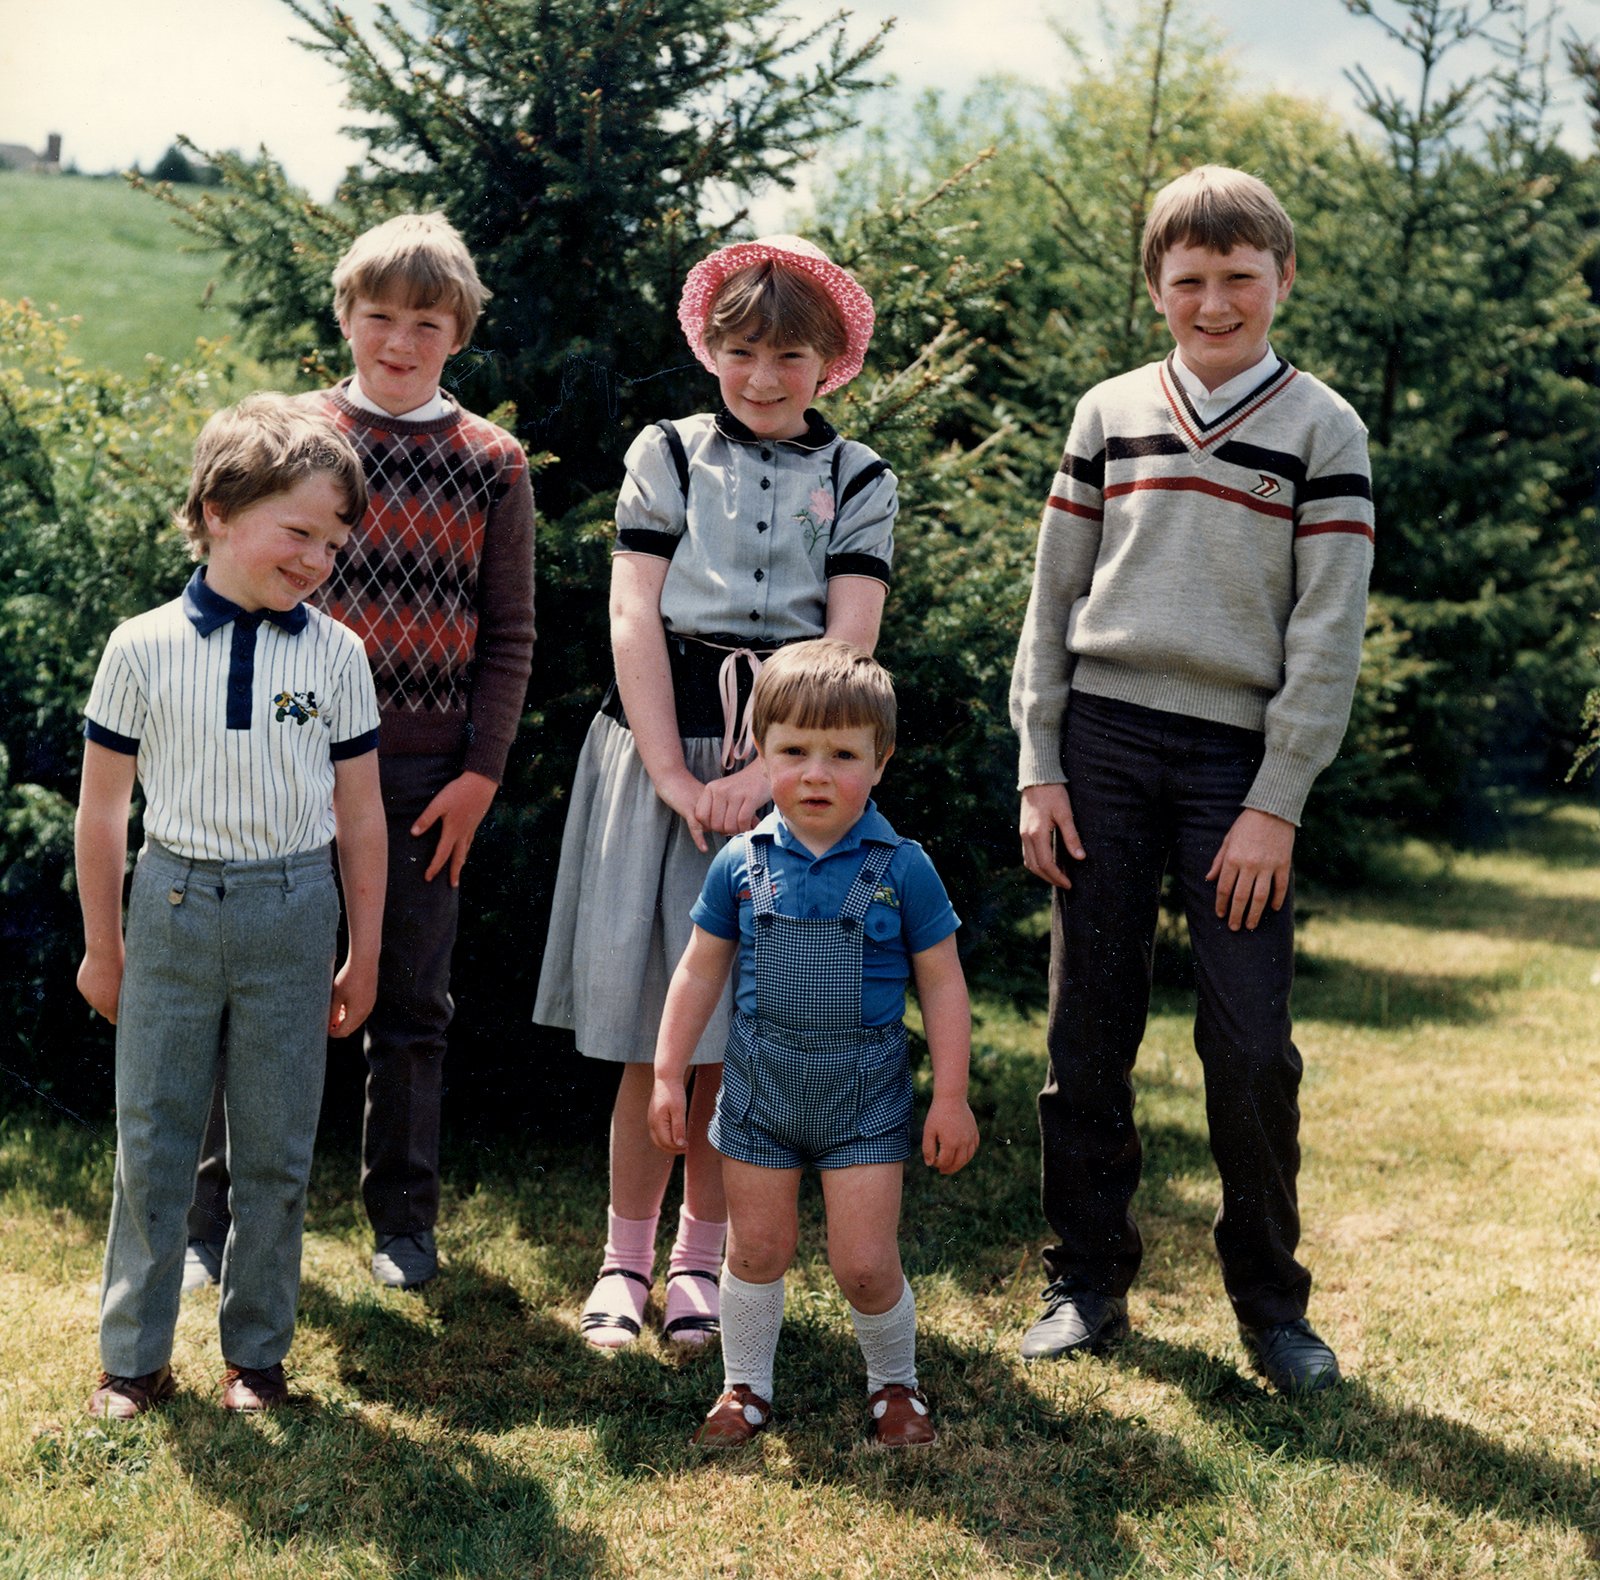 Griffin family group posing in a back garden.